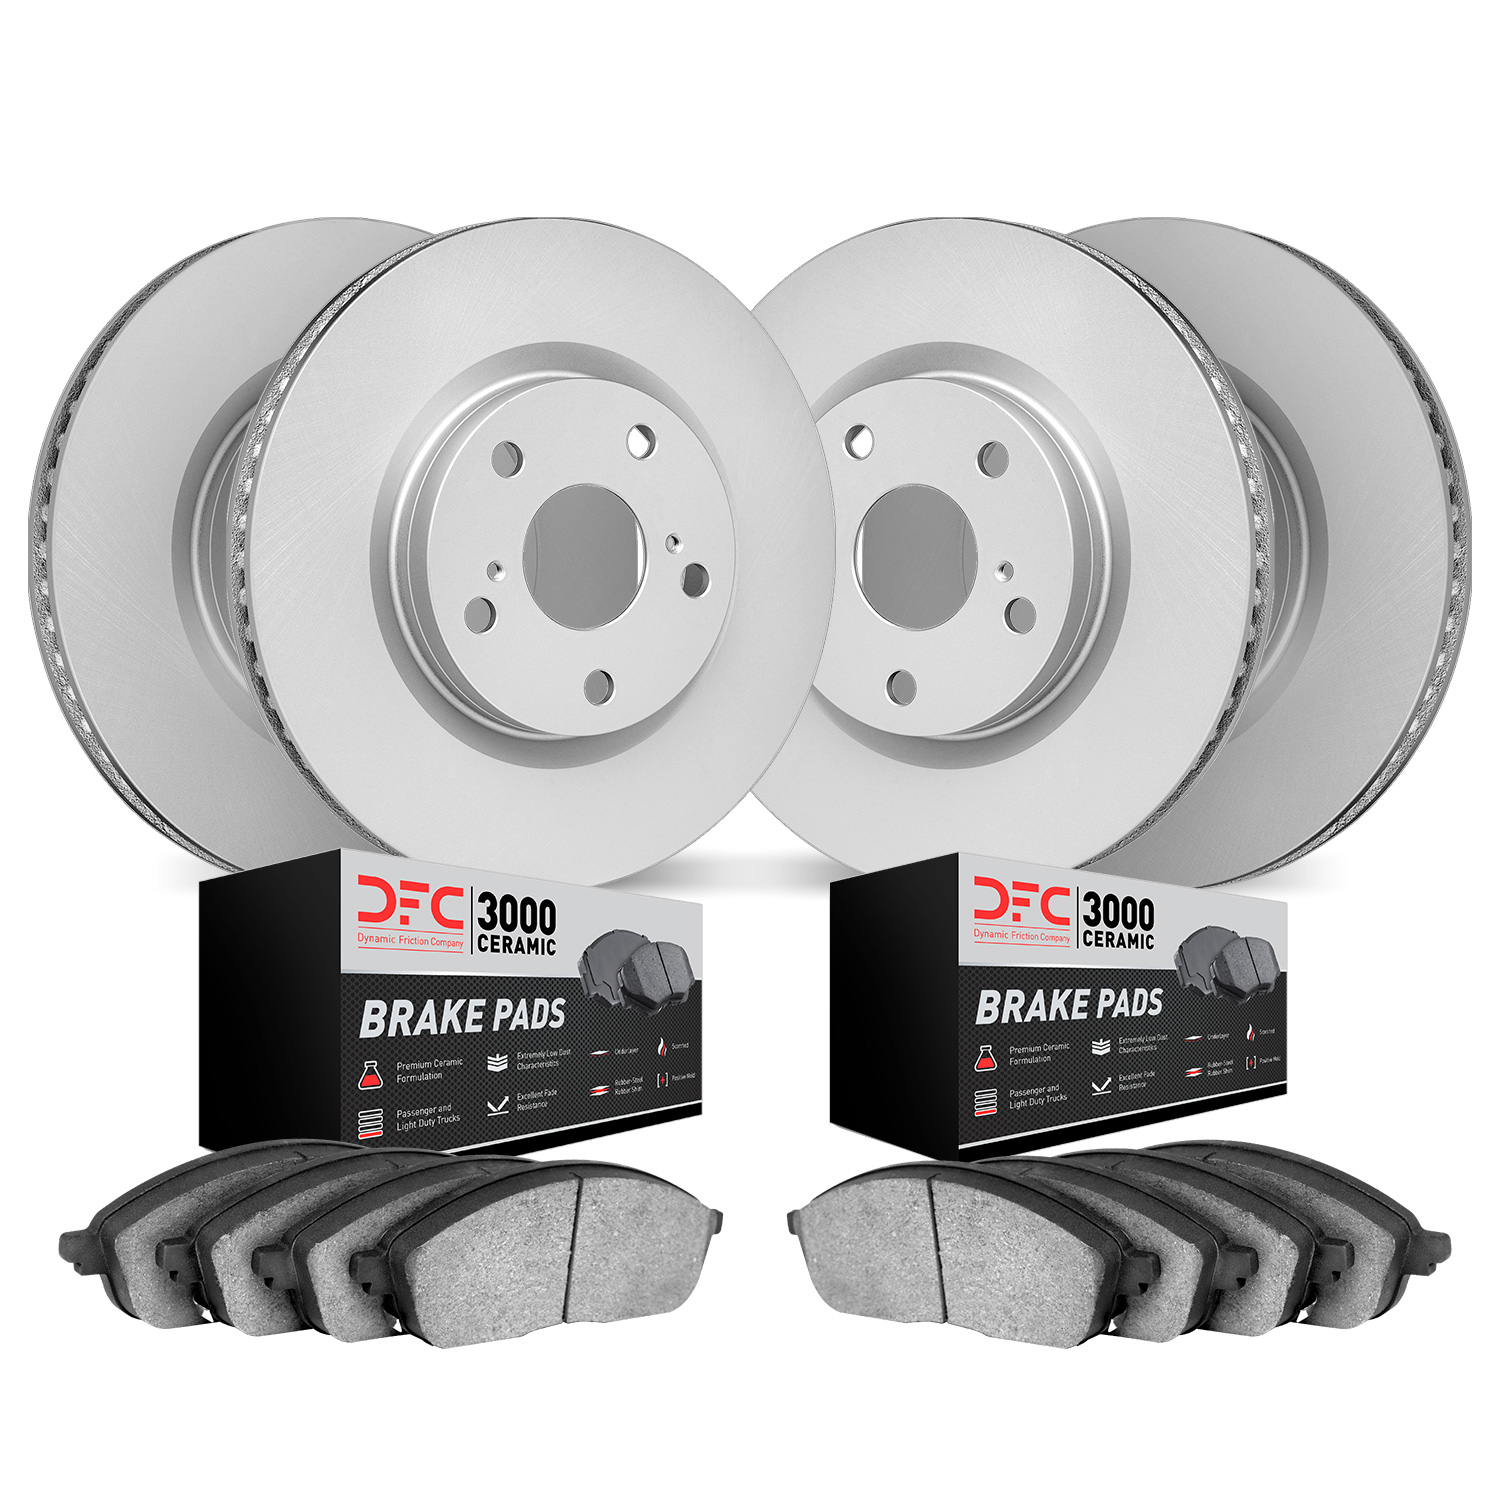 4304-74018 Geospec Brake Rotors with 3000-Series Ceramic Brake Pads Kit, 2003-2015 Multiple Makes/Models, Position: Front and Re